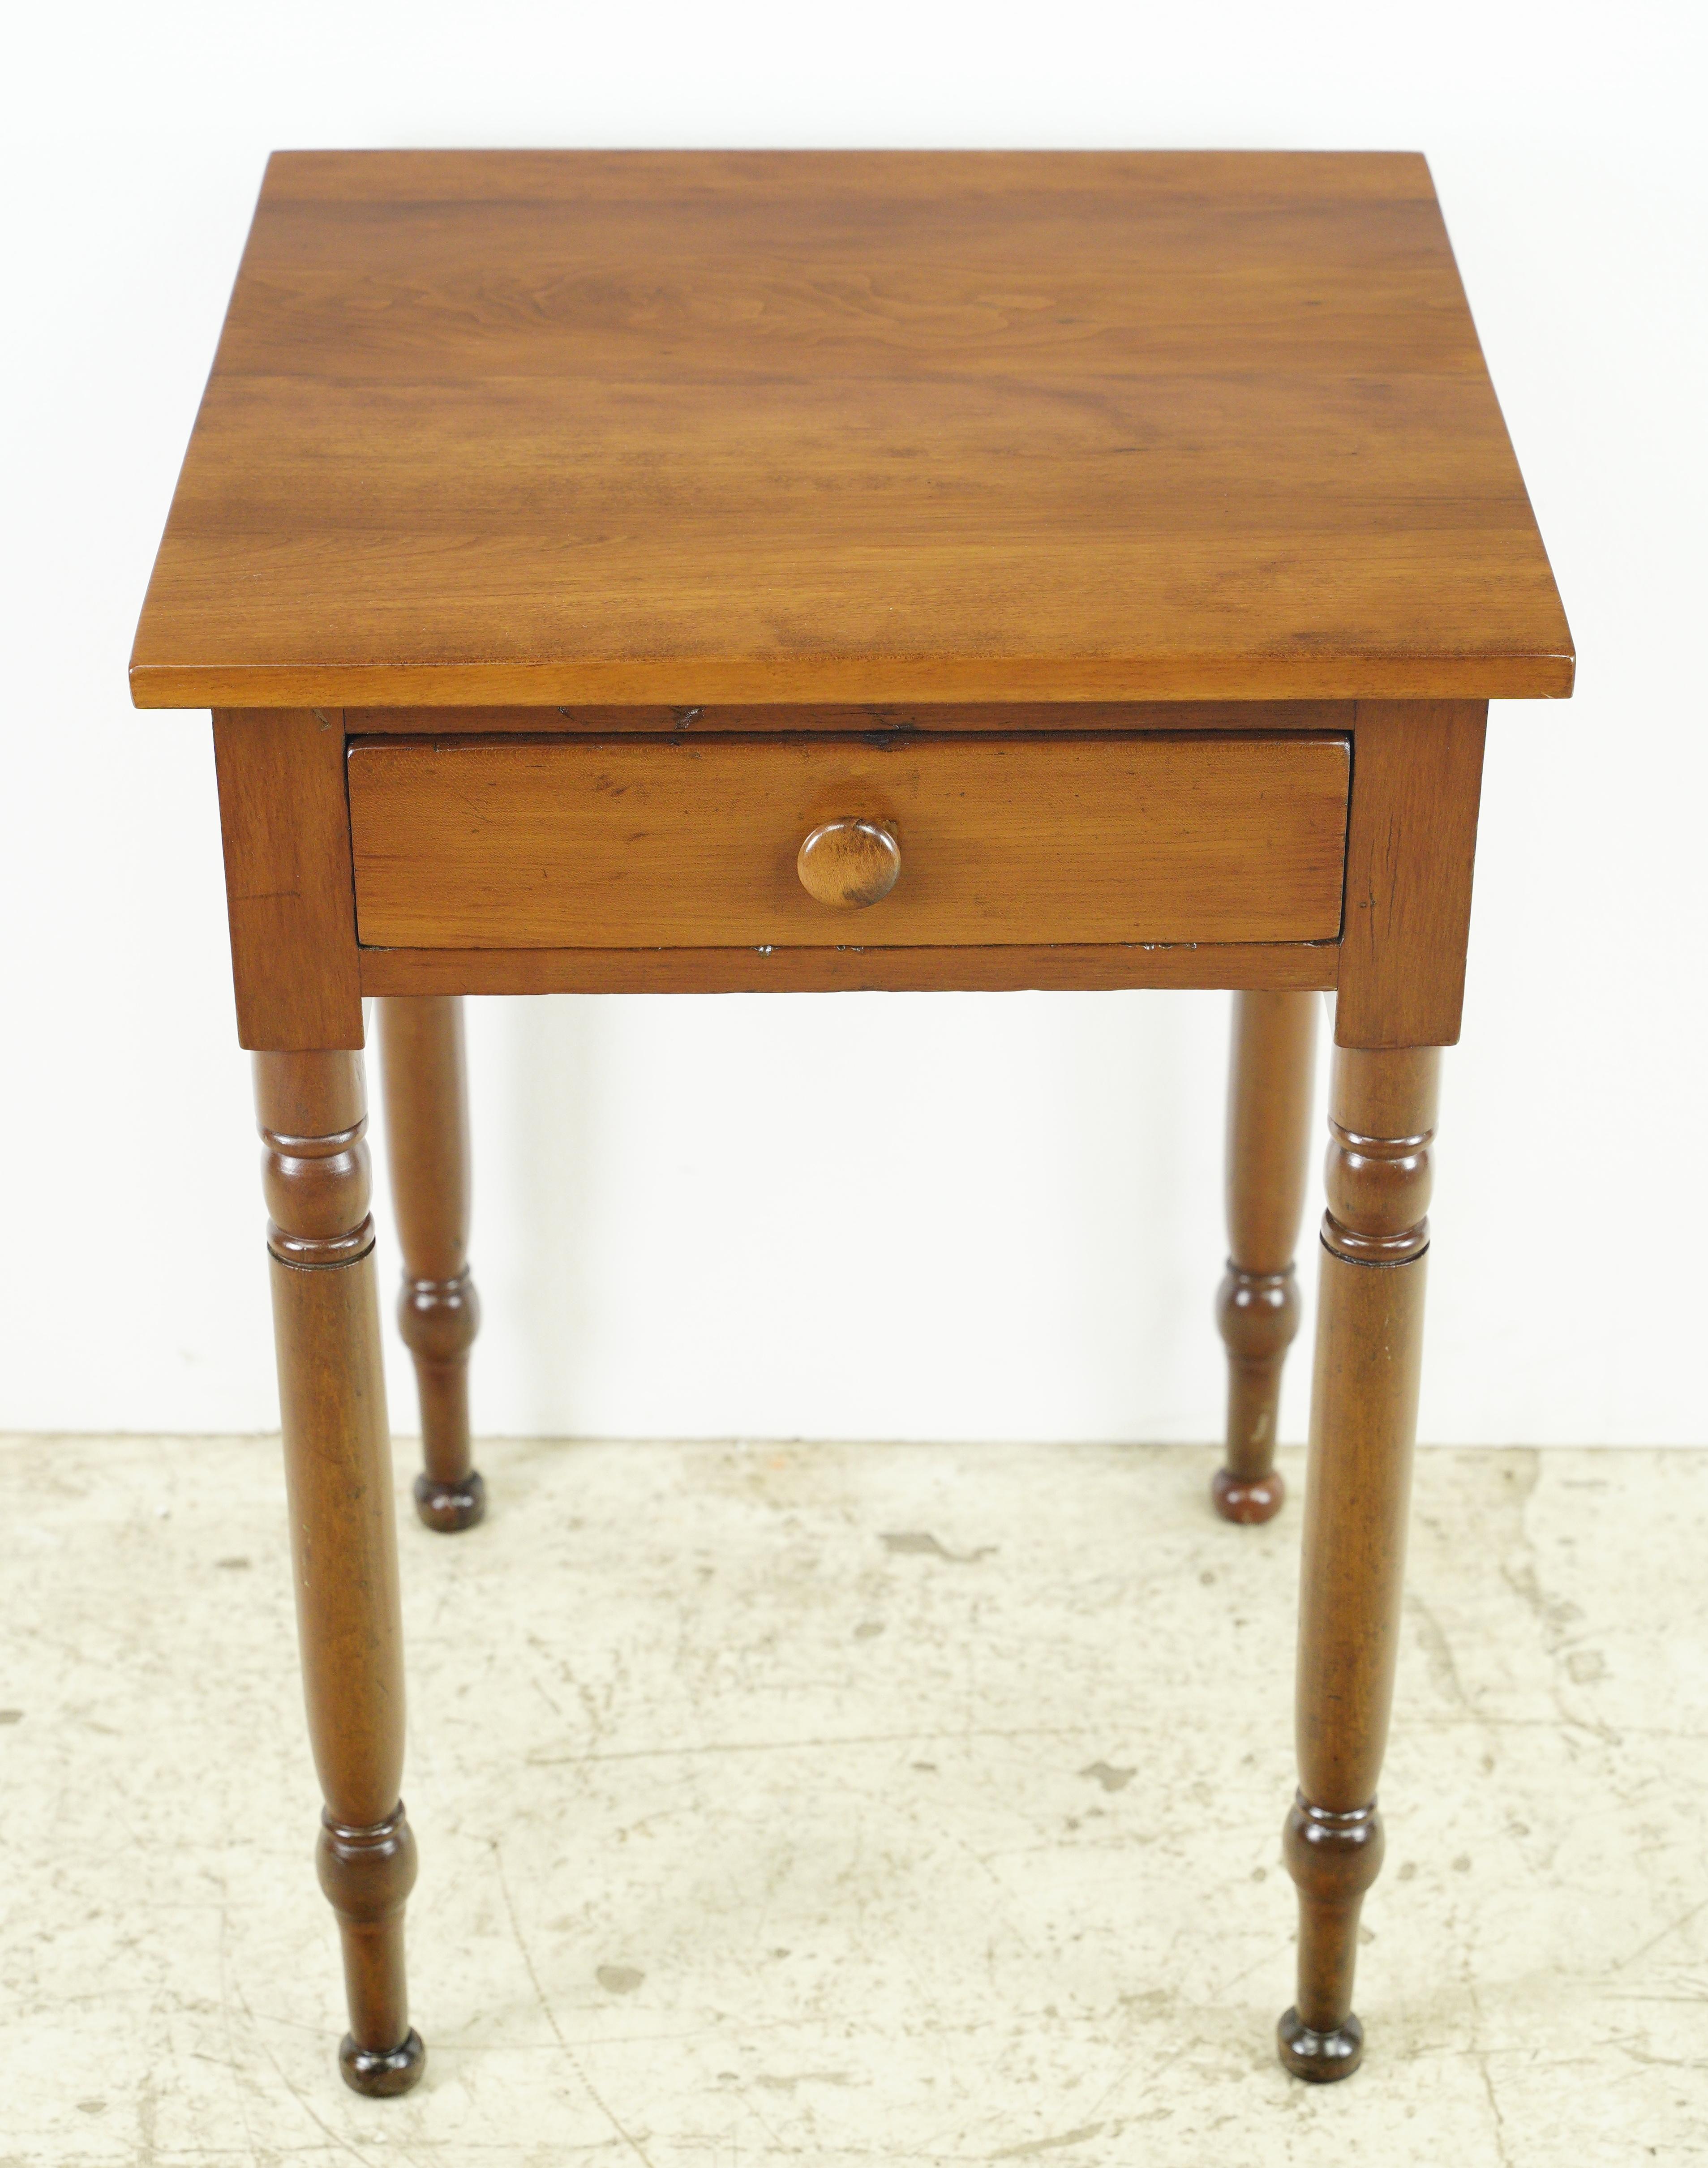 This antique end table is a charming and timeless piece of furniture. Crafted from cherry wood, it features a square design with a single drawer. The fact that it has been refinished suggests that it has been carefully restored to its former glory,